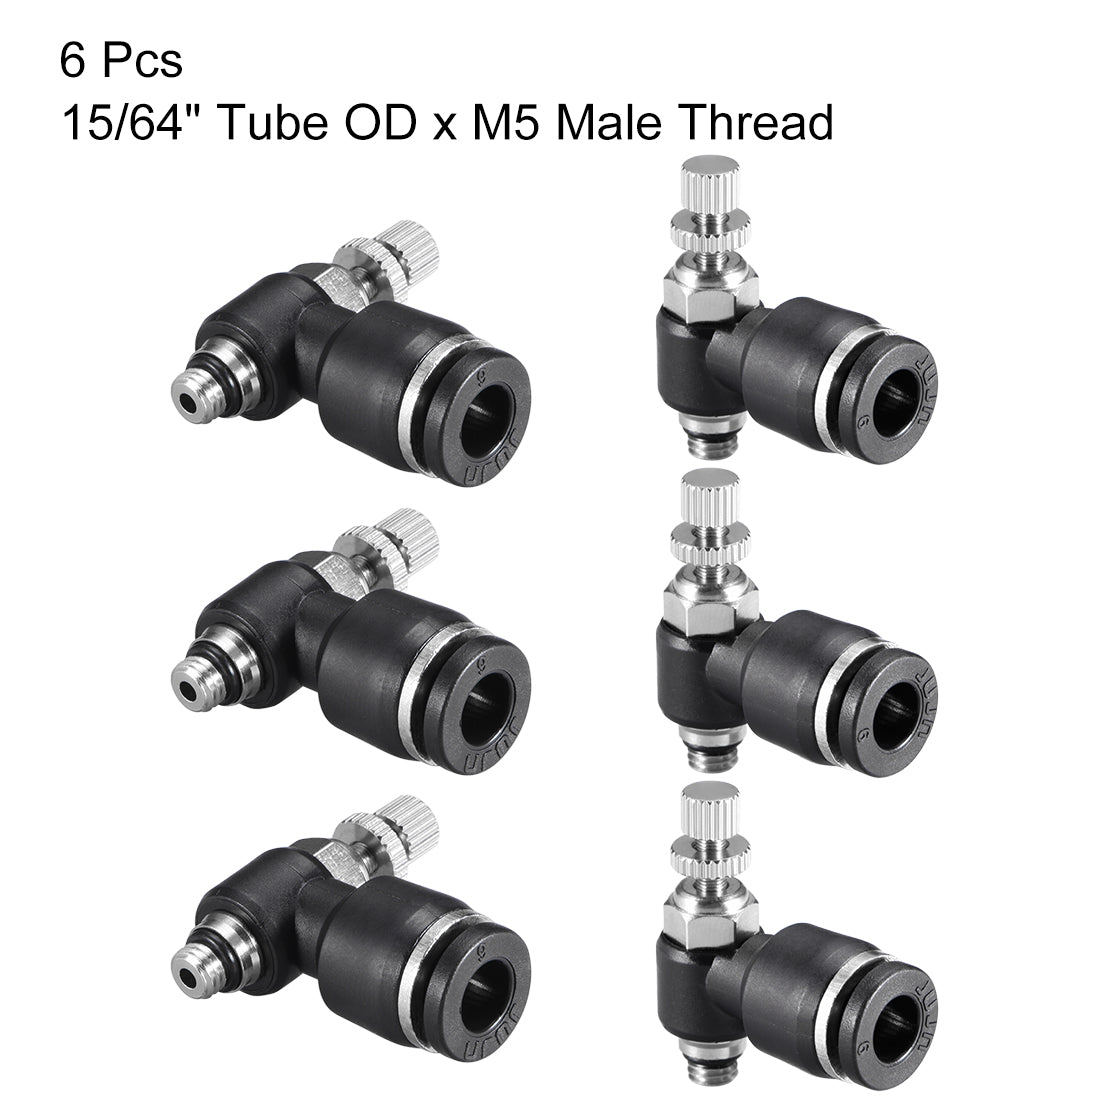 uxcell Uxcell Push-to-Connect Air Flow Control Valve, Elbow, 15/64" Tube OD x M5  Male Thread Speed controller Valve Tube fitting Black,6pcs